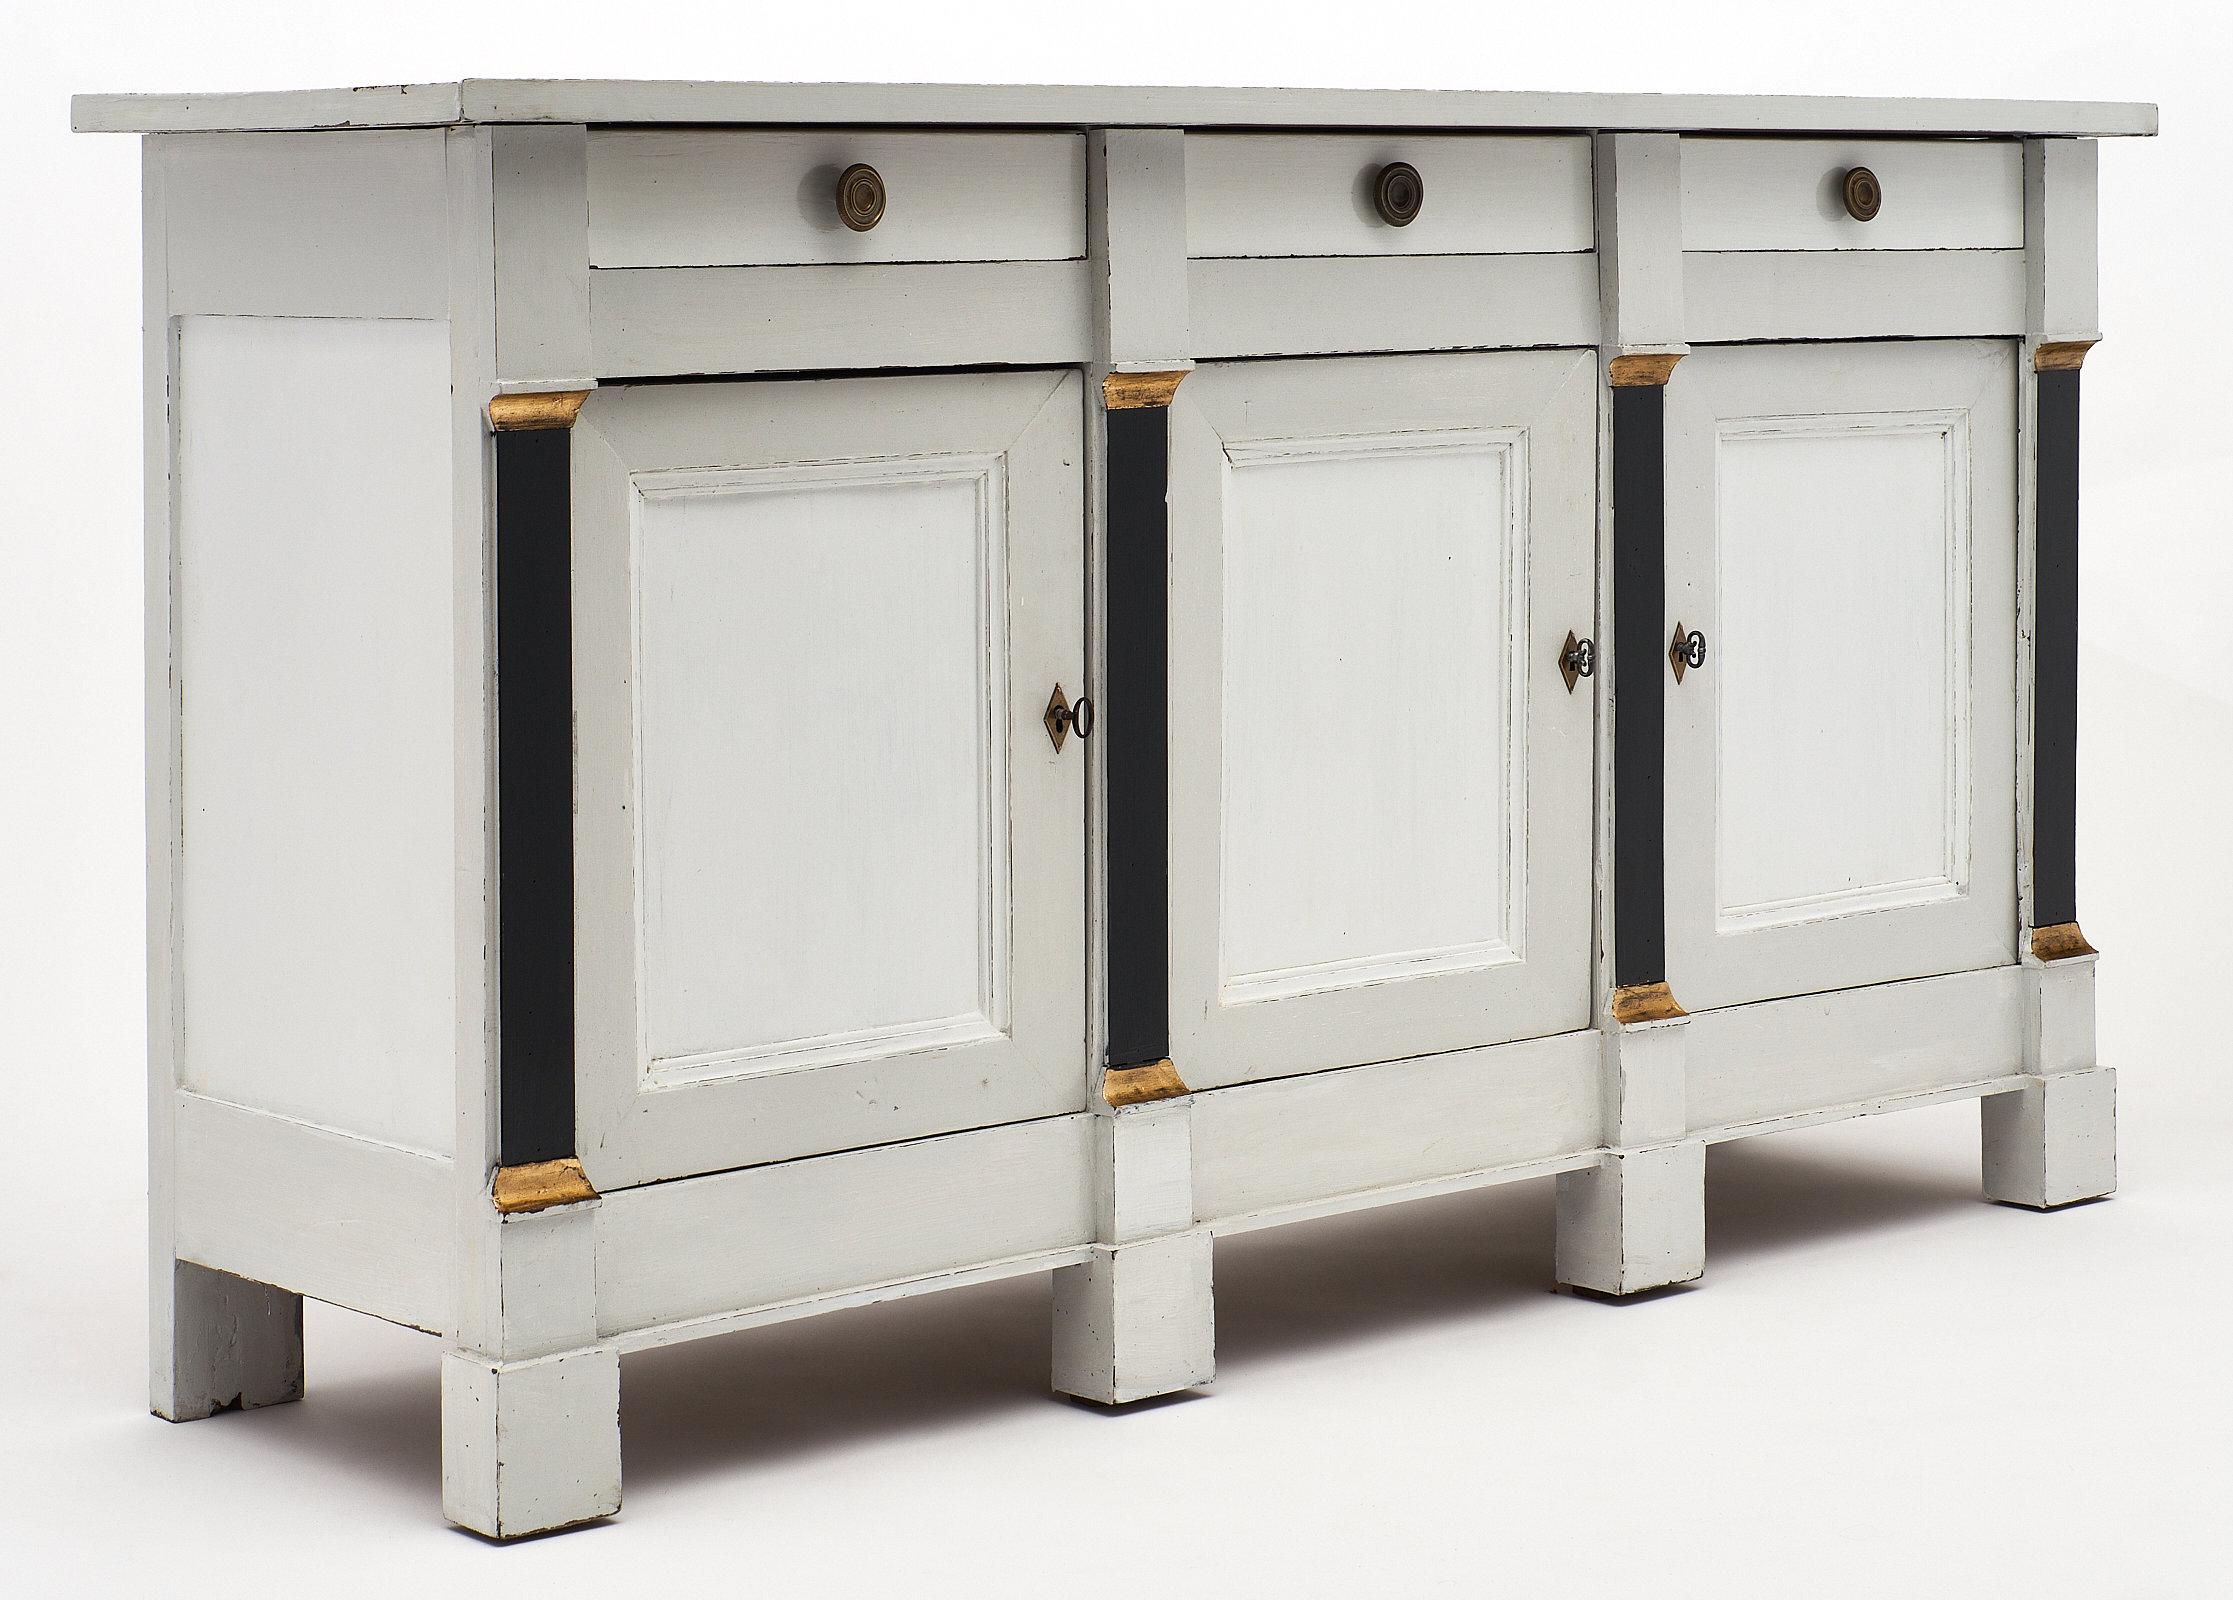 French painted Directoire style buffet made of walnut and patinated in a gray and white milk paint. This buffet features three doors with interior shelves and three dovetailed drawers. We love the ebonized and gold leaf details. Finely cast